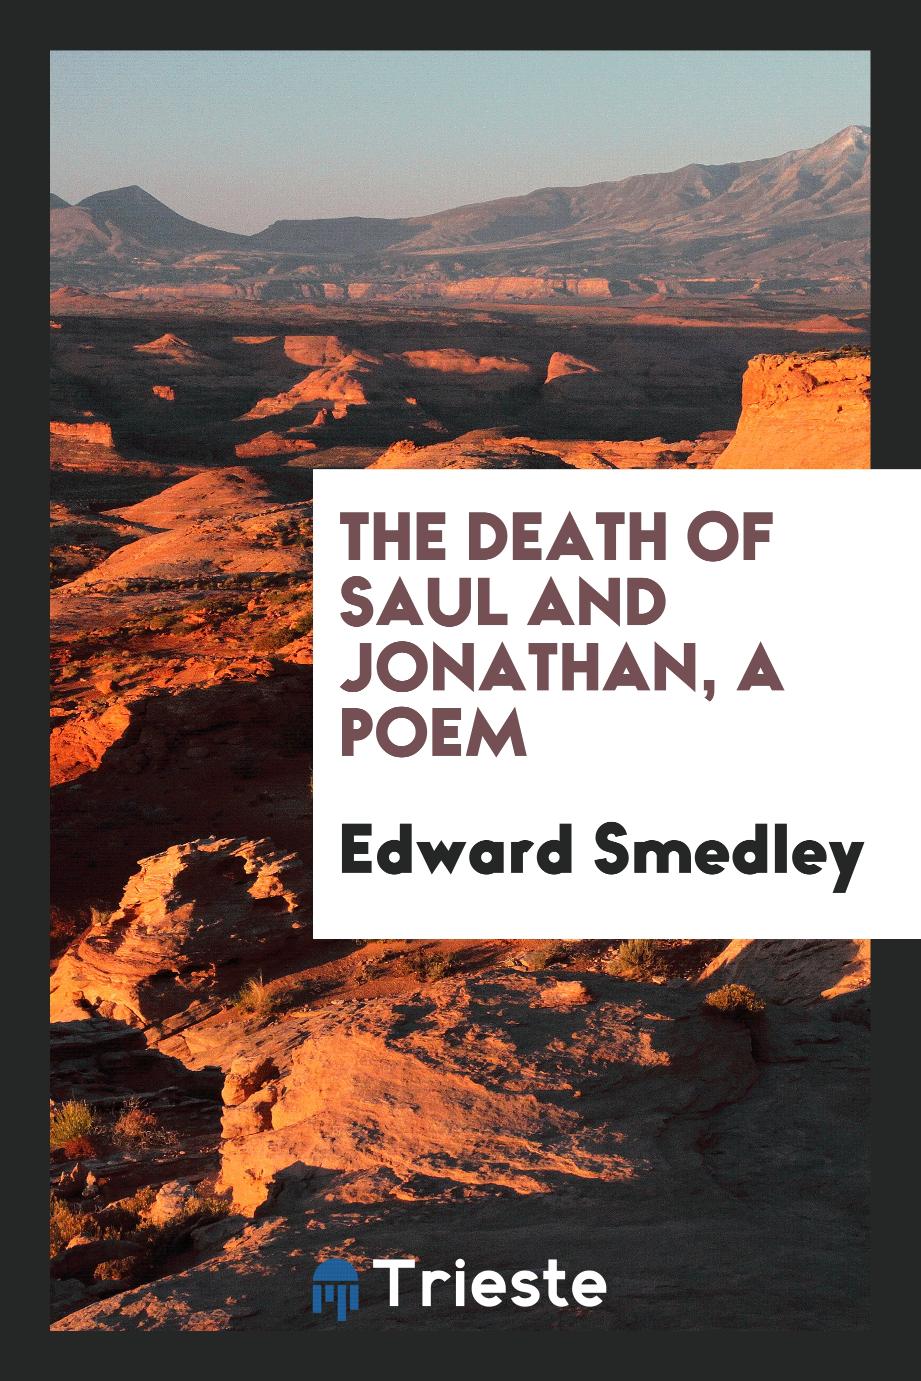 The death of Saul and Jonathan, a poem